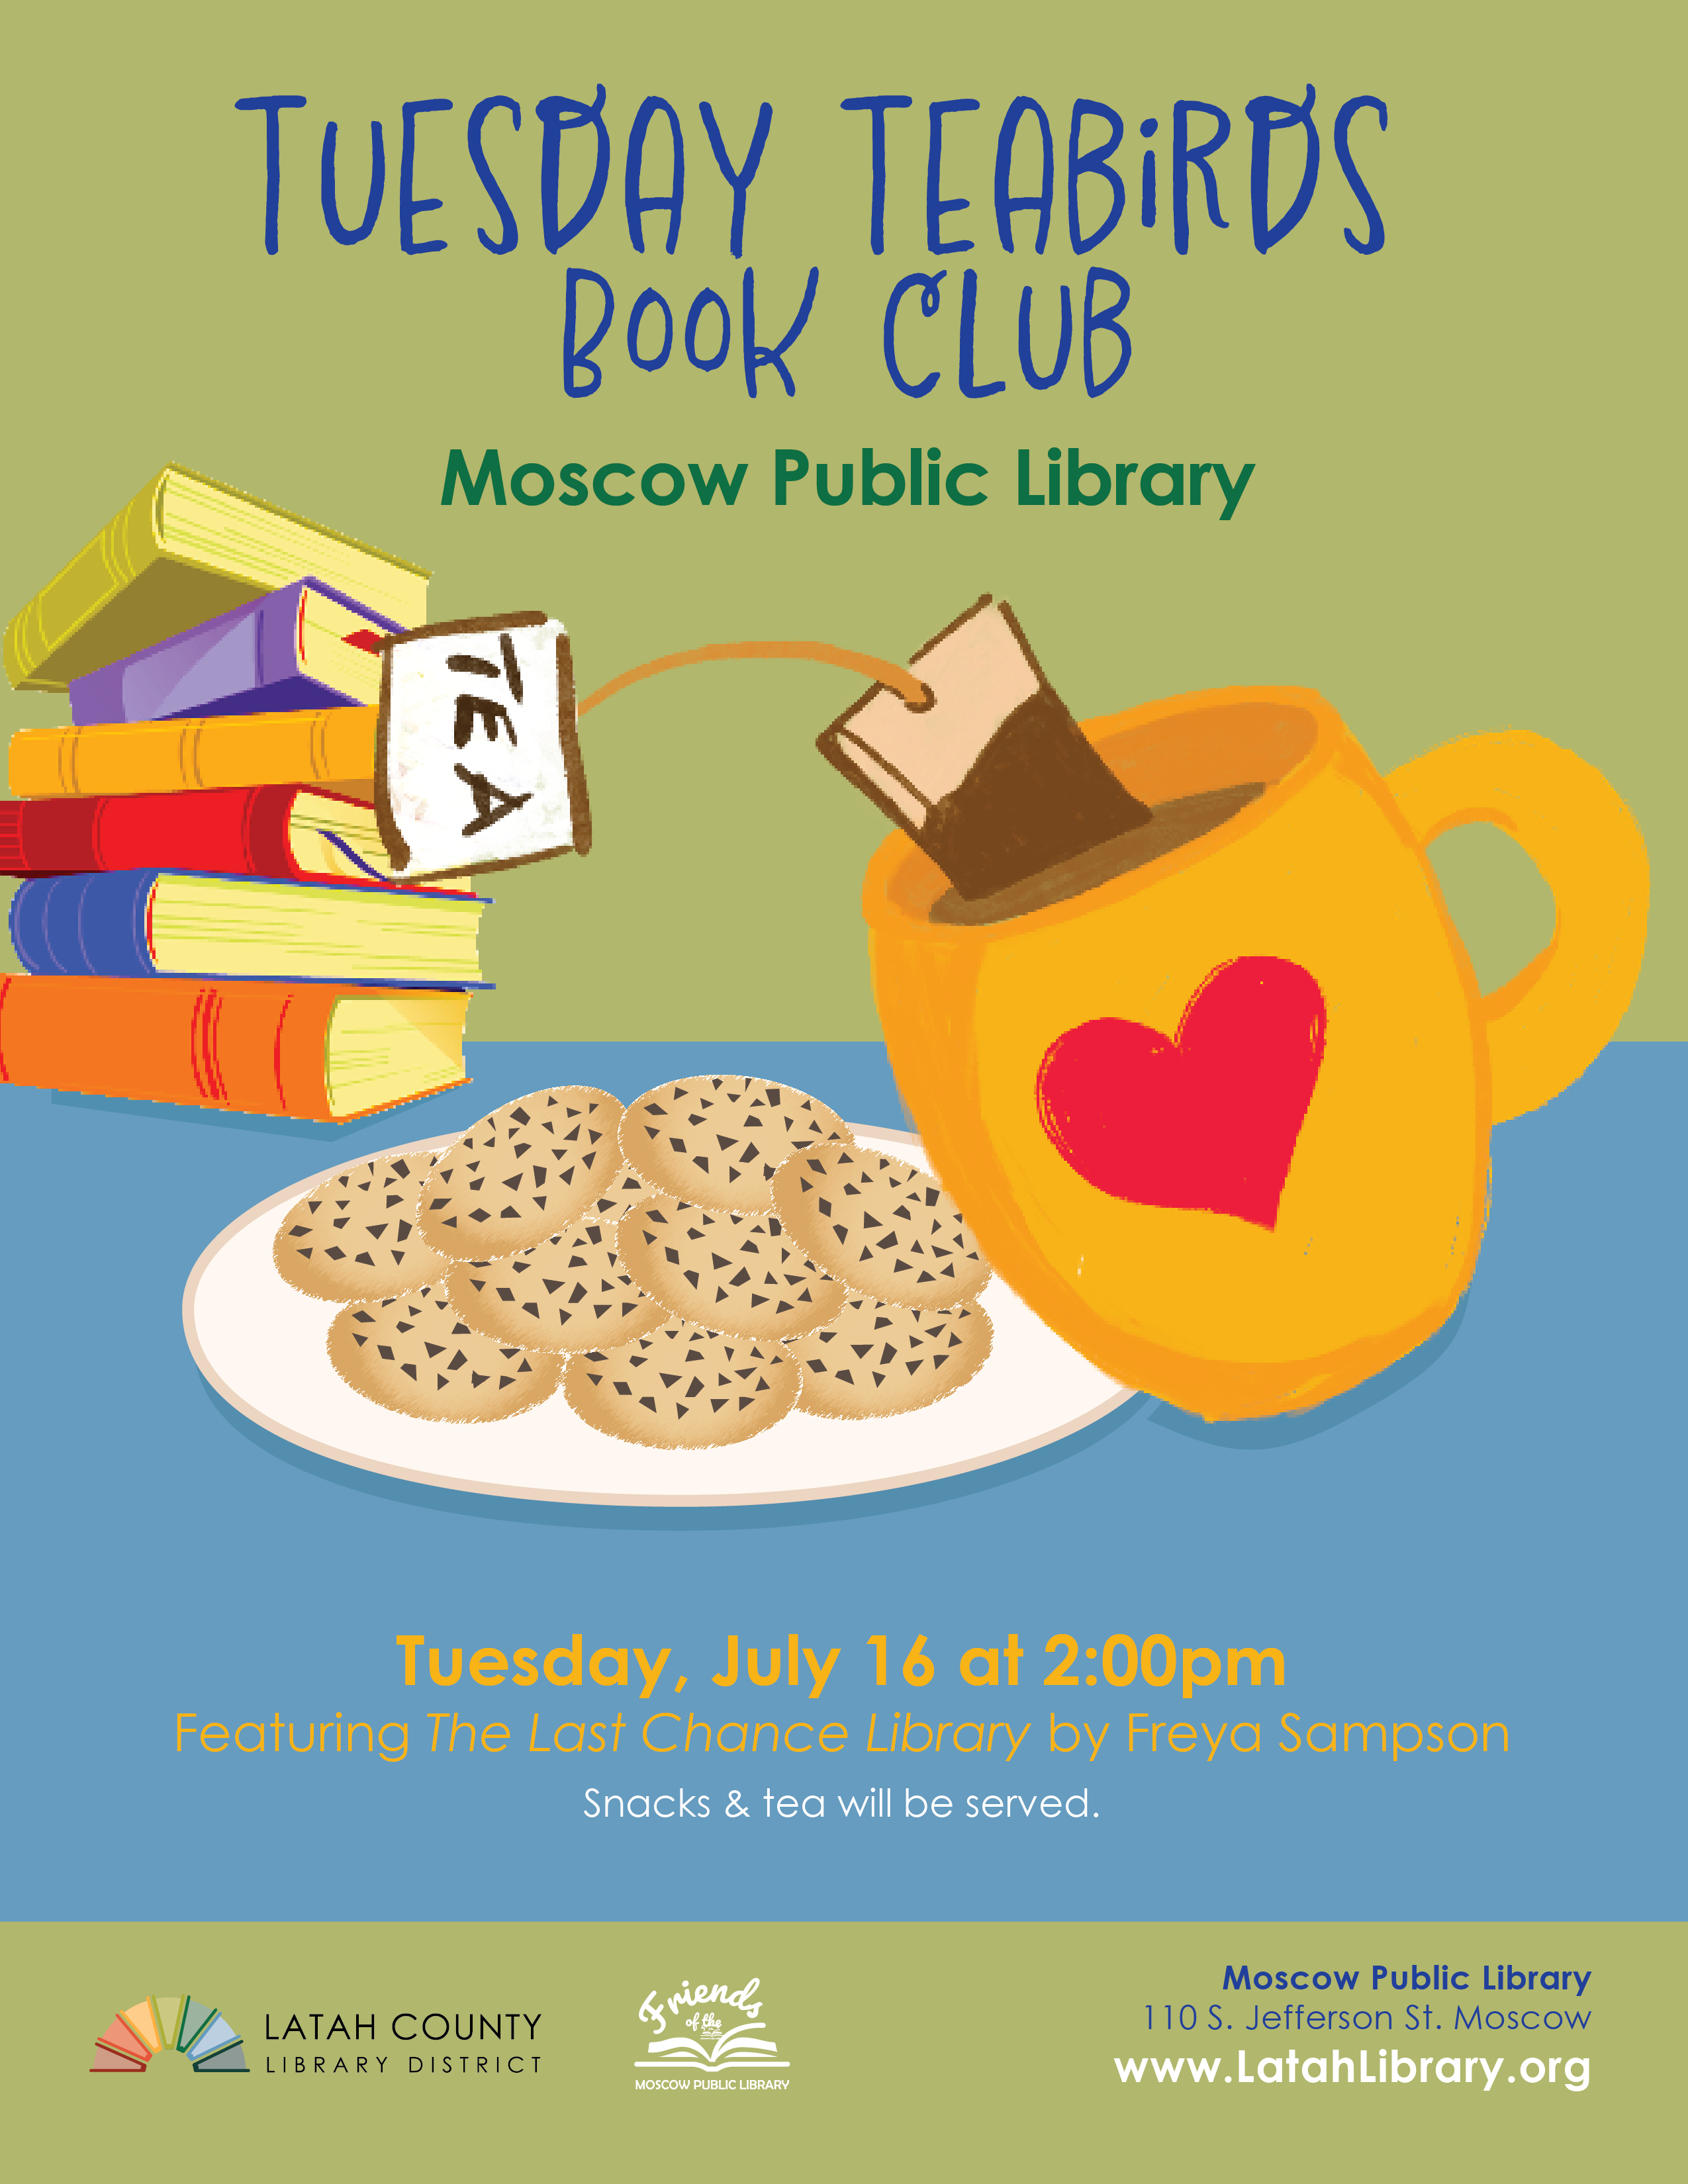 Tuesday Teabirds Book Club at the Moscow Public Library